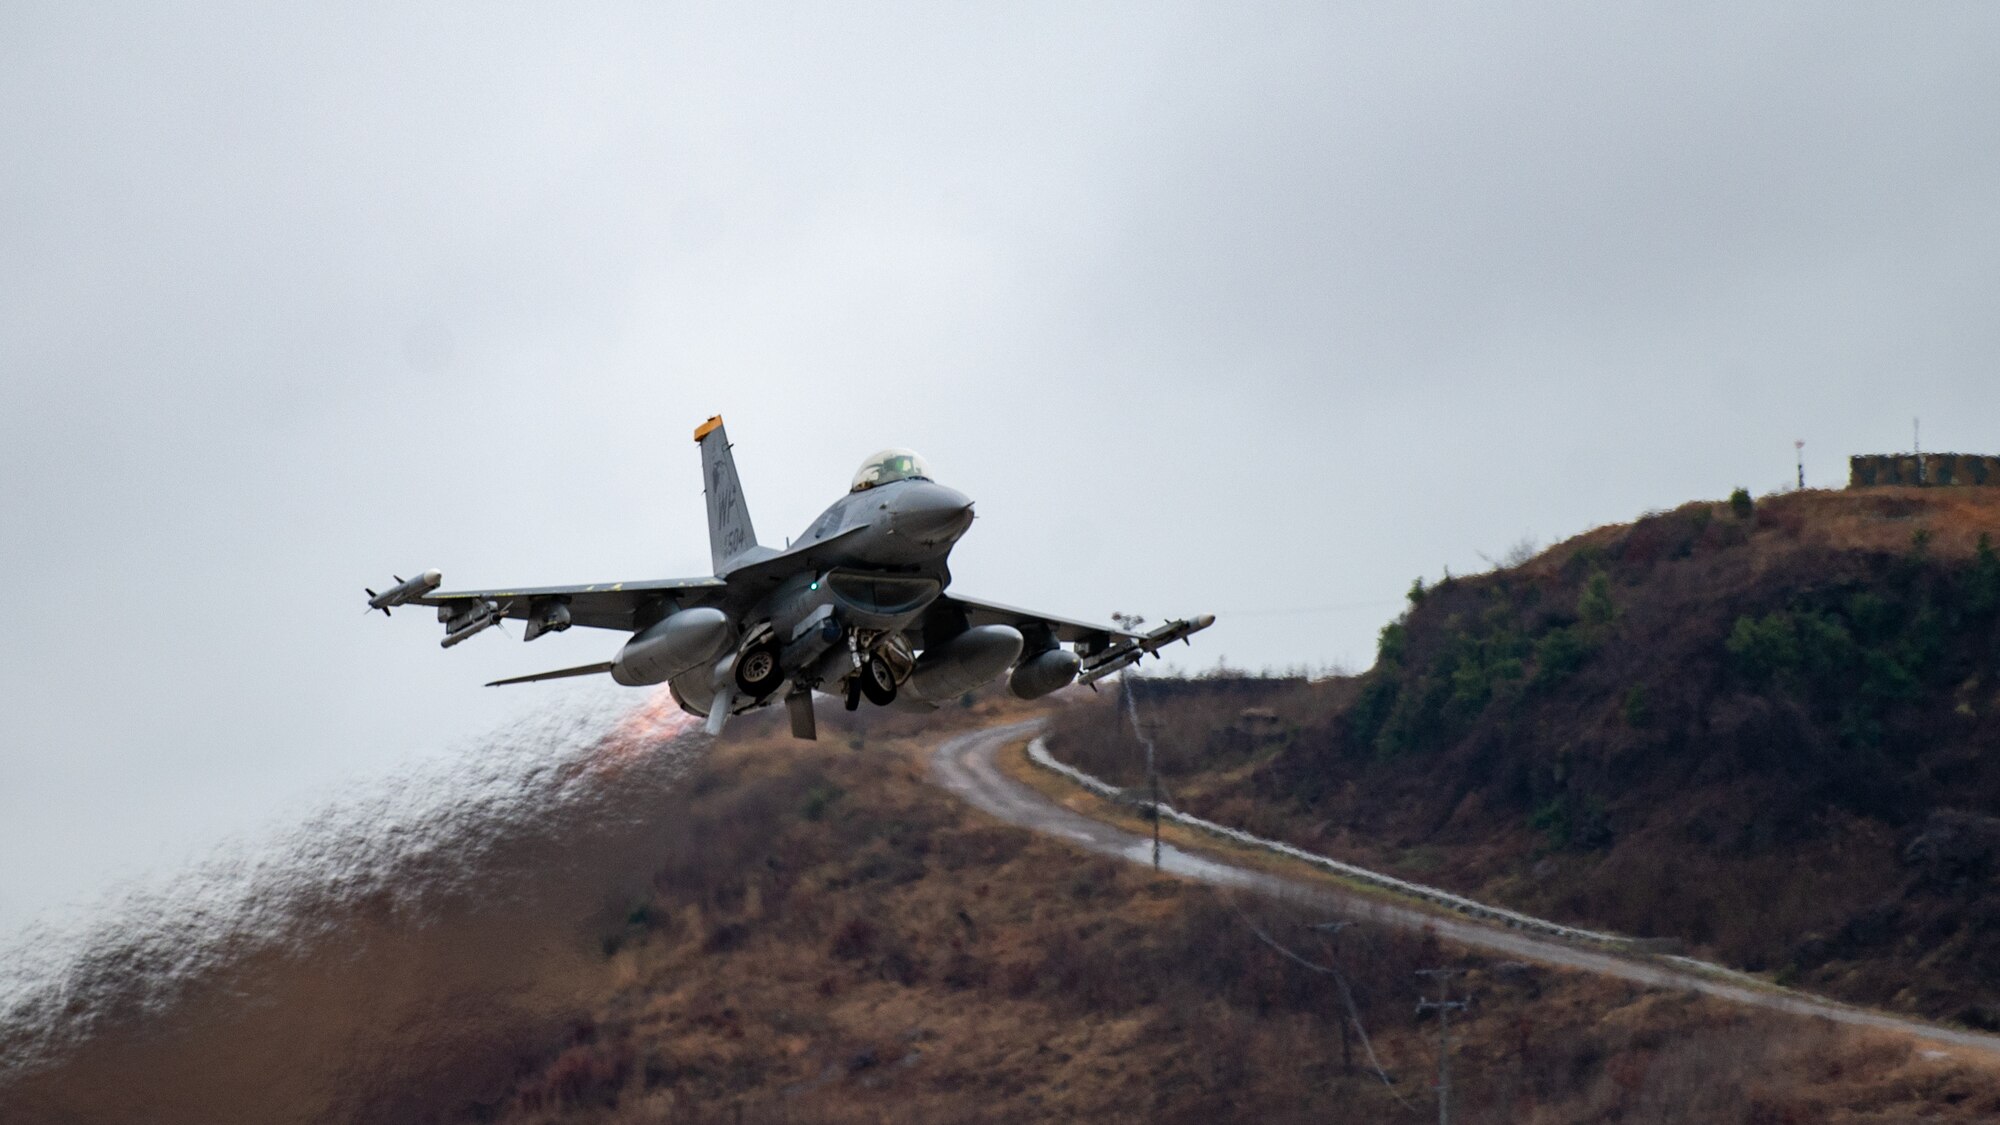 A U.S. Air Force F-16 Fighting Falcon assigned to the 8th Fighter Wing takes off.